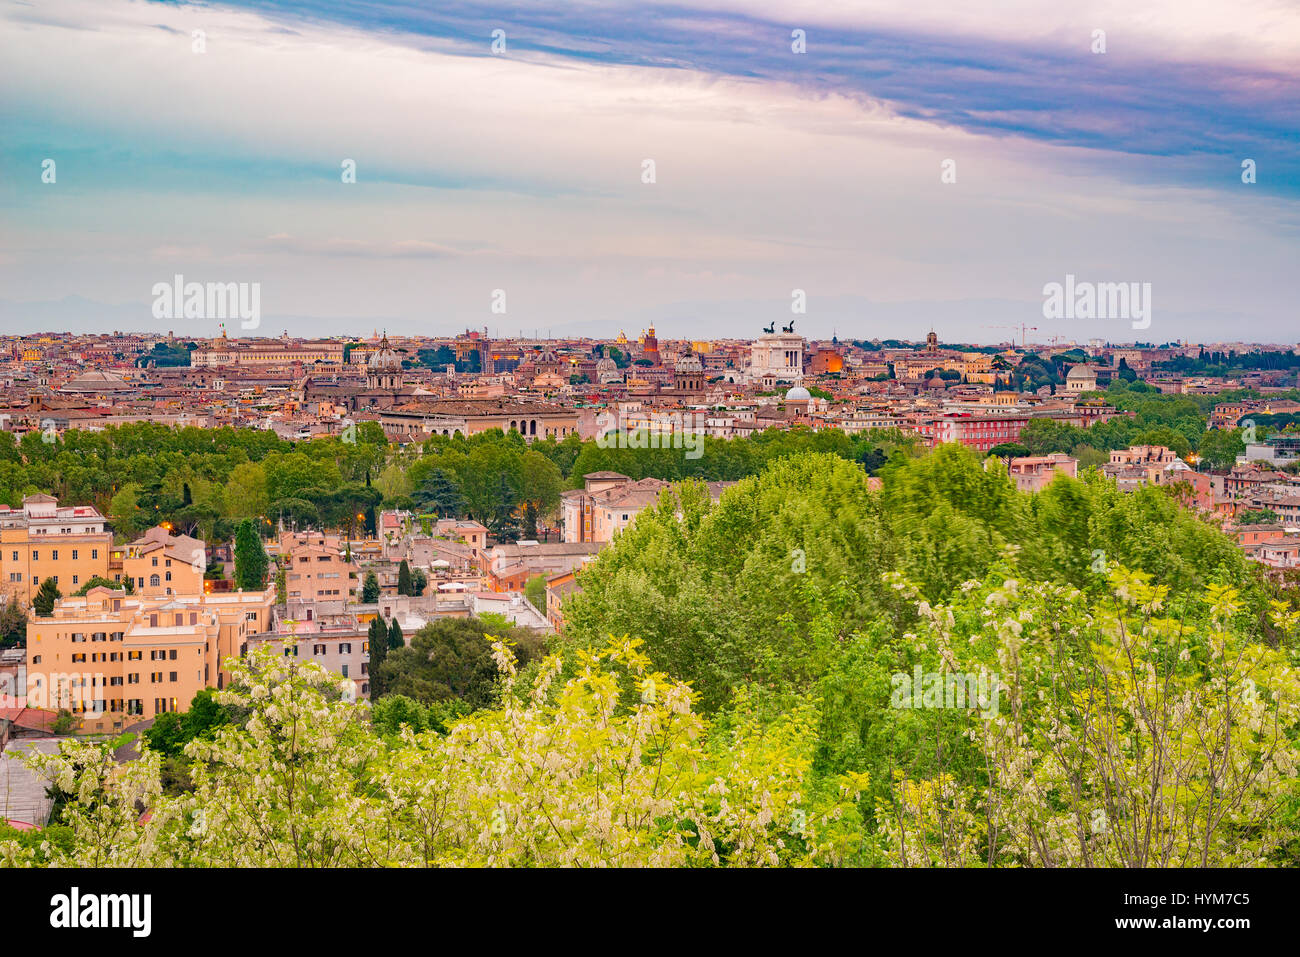 Rome, Italy, at dusk. Panoramic cityscape from above with cross processing filter applied. Stock Photo